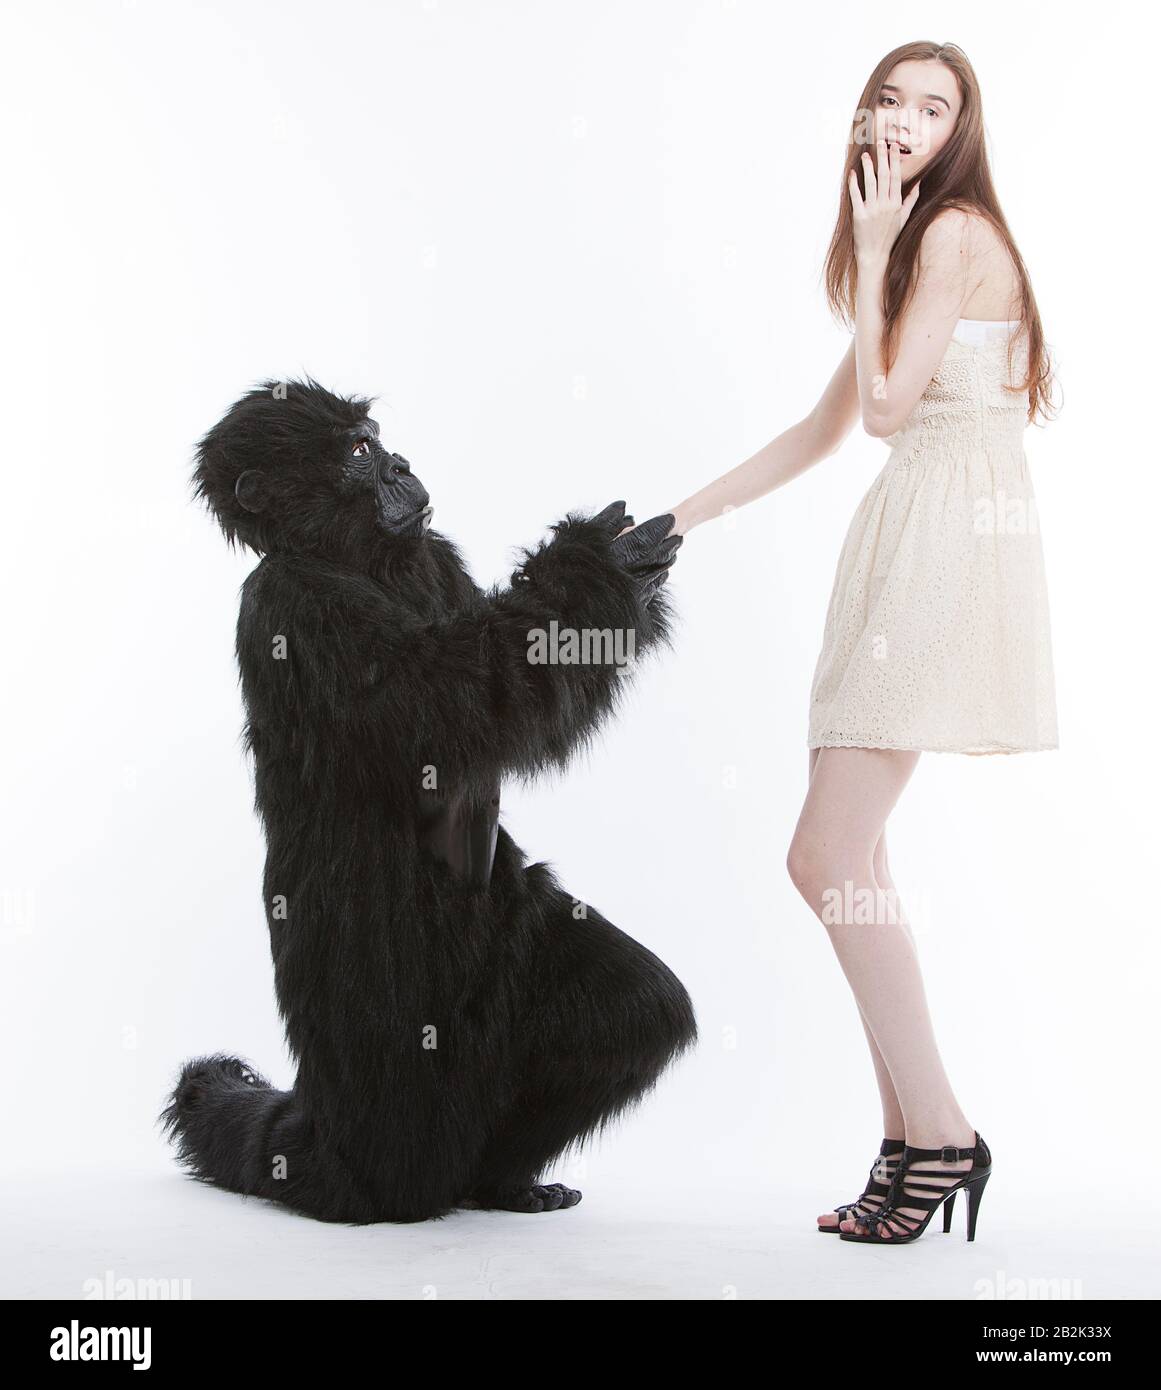 Man in gorilla costume proposing surprised young woman against white background Stock Photo